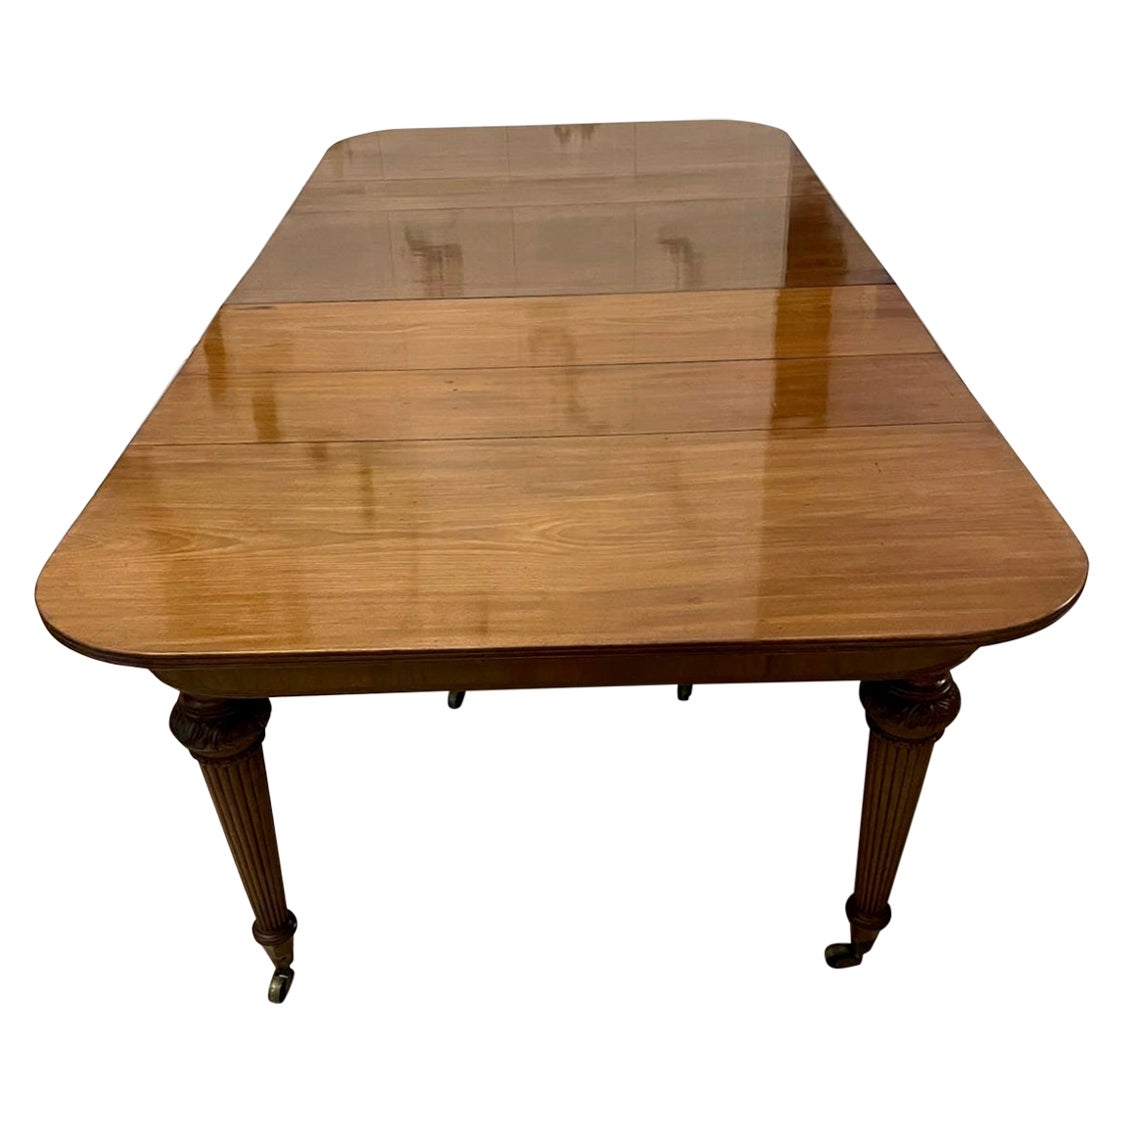 Superb Quality Metamorphic Antique Figured Mahogany Extending Dining Table